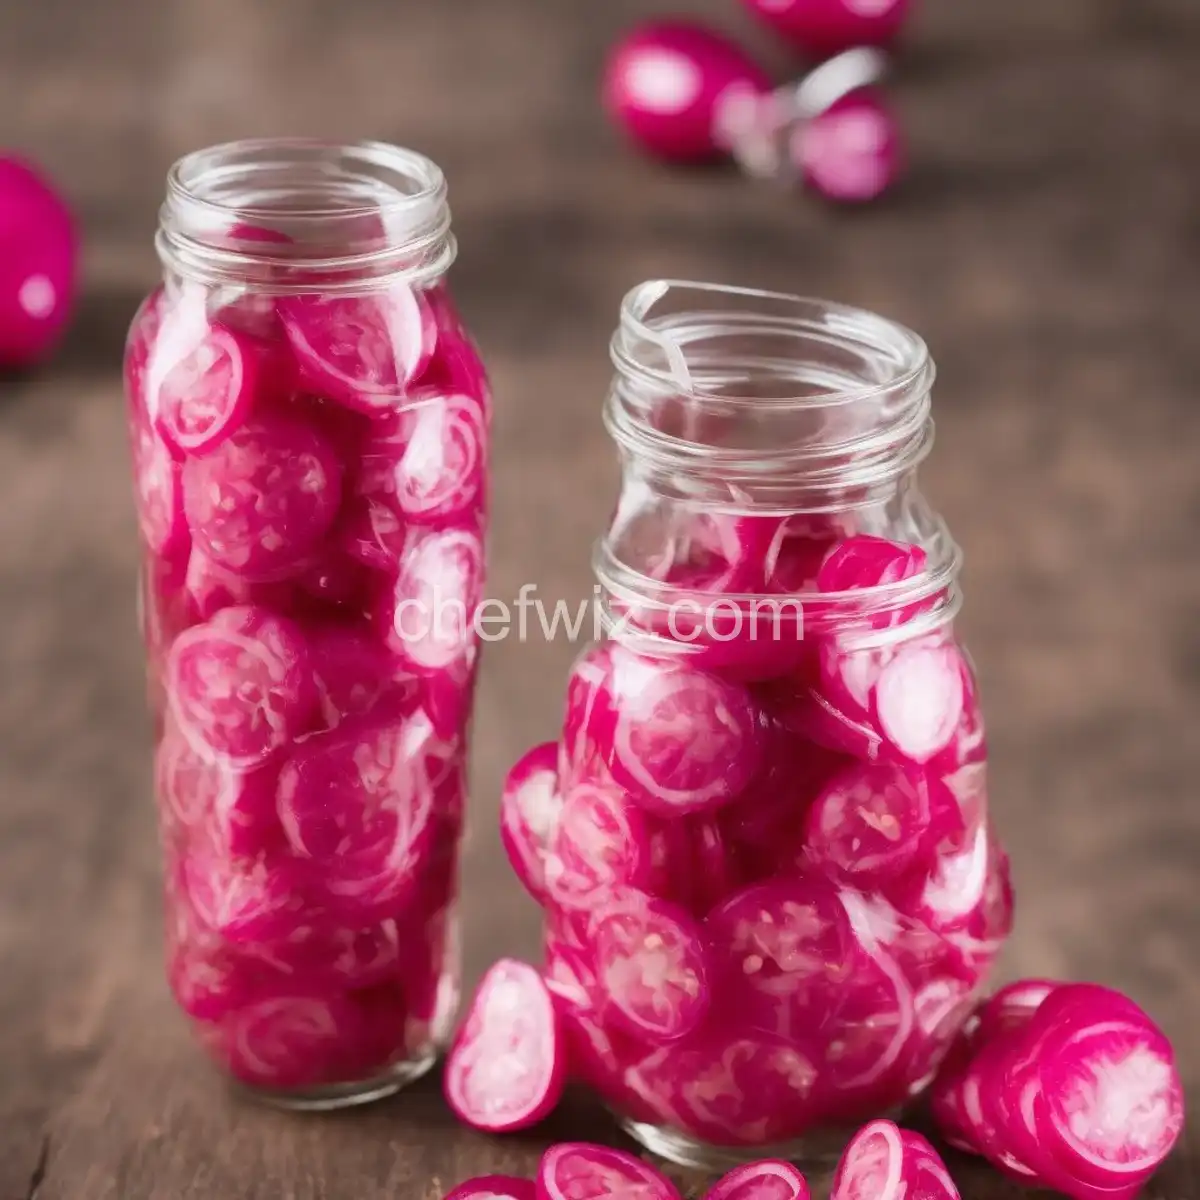 Pickled Red Onions - Recipes. Food. Cooking. Eating. Dinner ideas ...